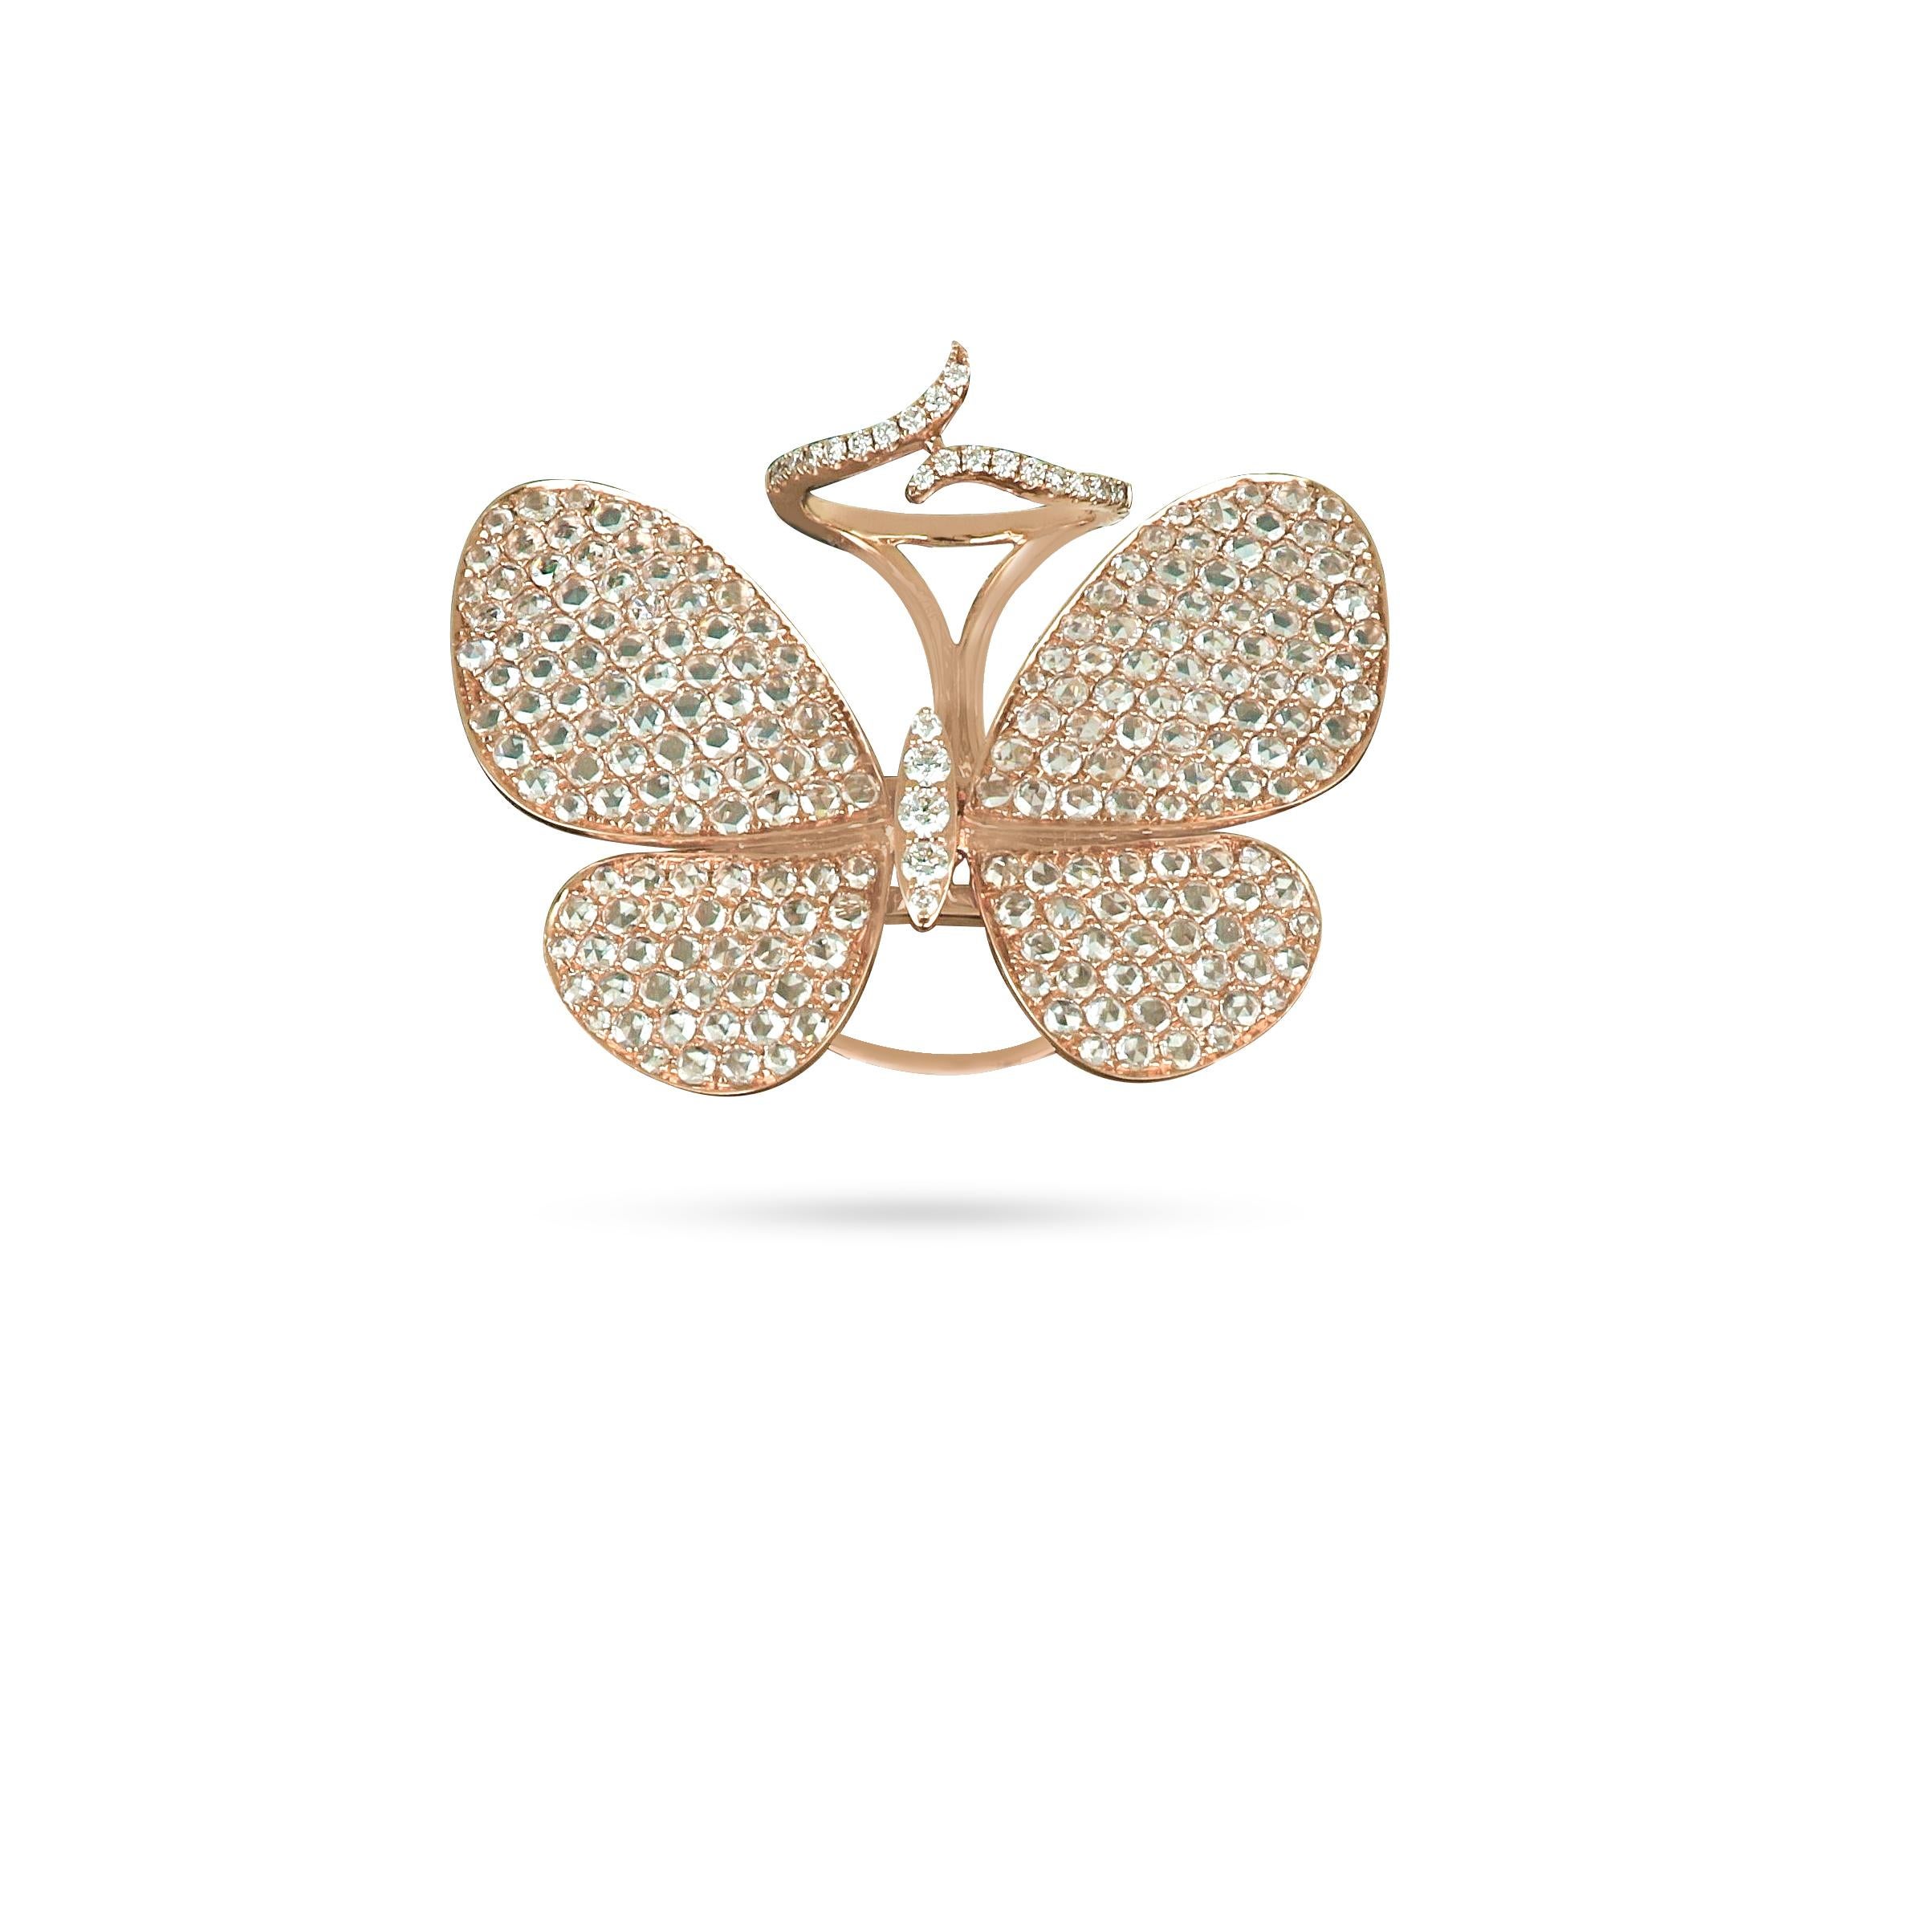 A perfectly proportioned expression of butterfly motif, Amwaj 18 karat rose gold butterfly ring features classis arrangement of round diamond gently angled to capture the delicacy of a butterfly’s wings. Round diamonds trace the outline of the